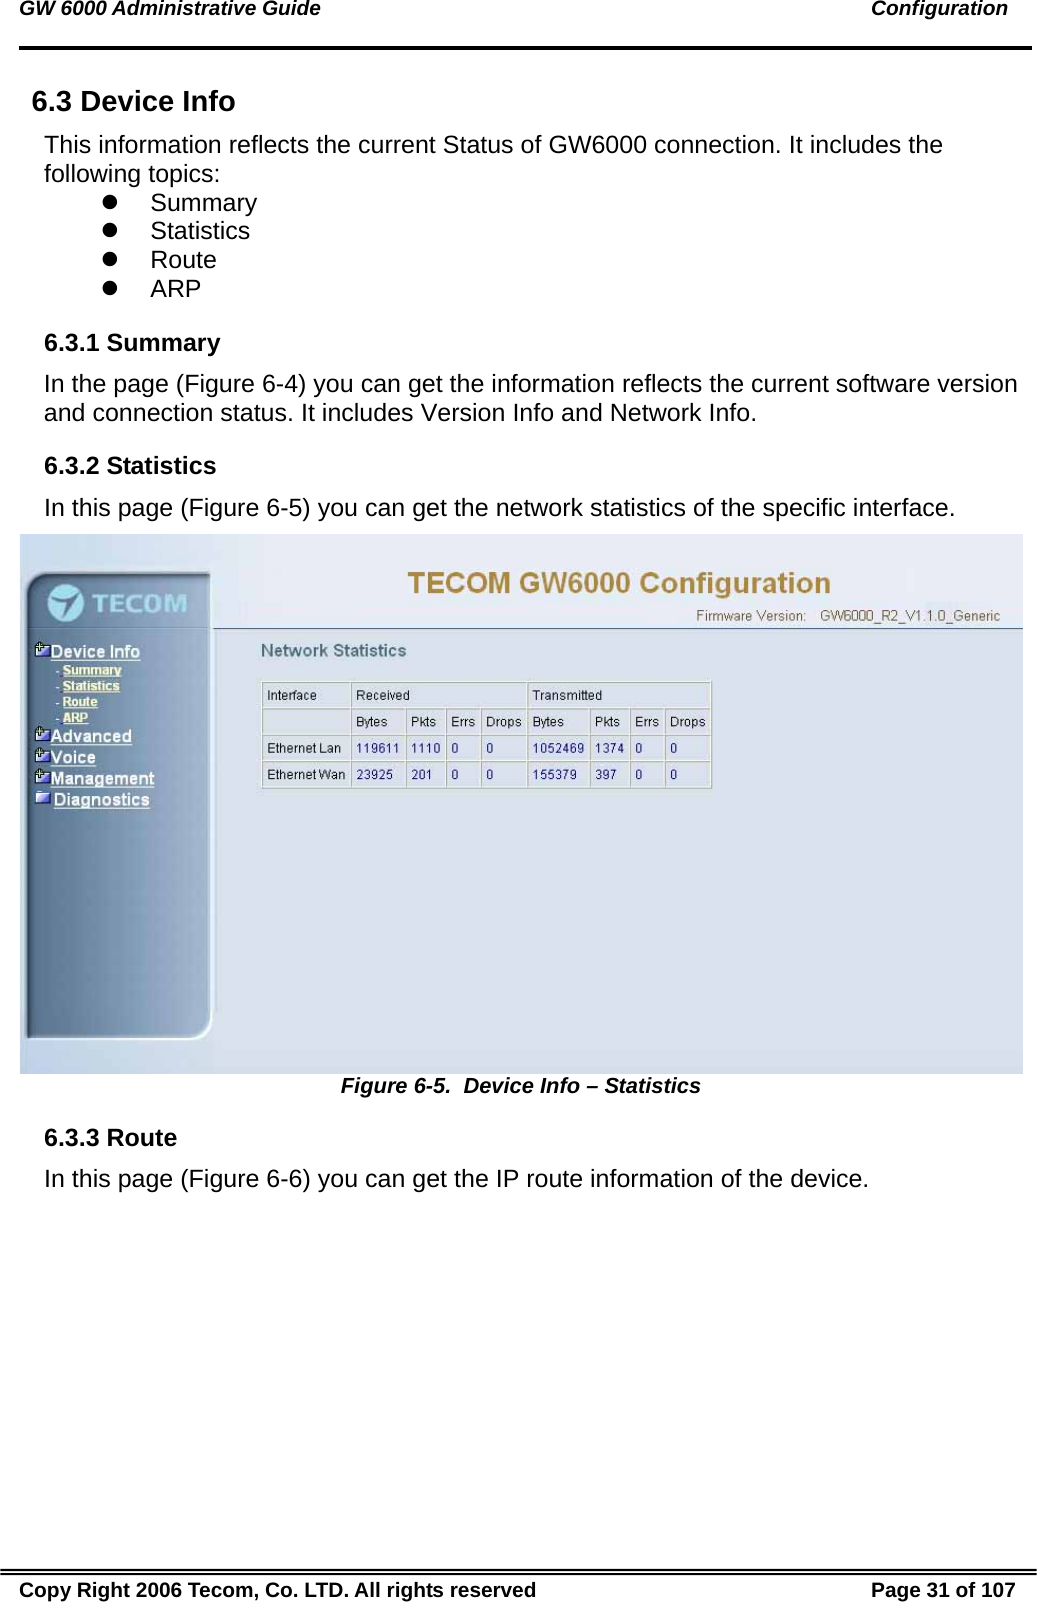 GW 6000 Administrative Guide                                                                                               Configuration 6.3 Device Info This information reflects the current Status of GW6000 connection. It includes the following topics: z Summary z Statistics z Route z ARP 6.3.1 Summary In the page (Figure 6-4) you can get the information reflects the current software version and connection status. It includes Version Info and Network Info. 6.3.2 Statistics In this page (Figure 6-5) you can get the network statistics of the specific interface.  Figure 6-5.  Device Info – Statistics 6.3.3 Route In this page (Figure 6-6) you can get the IP route information of the device. Copy Right 2006 Tecom, Co. LTD. All rights reserved  Page 31 of 107 